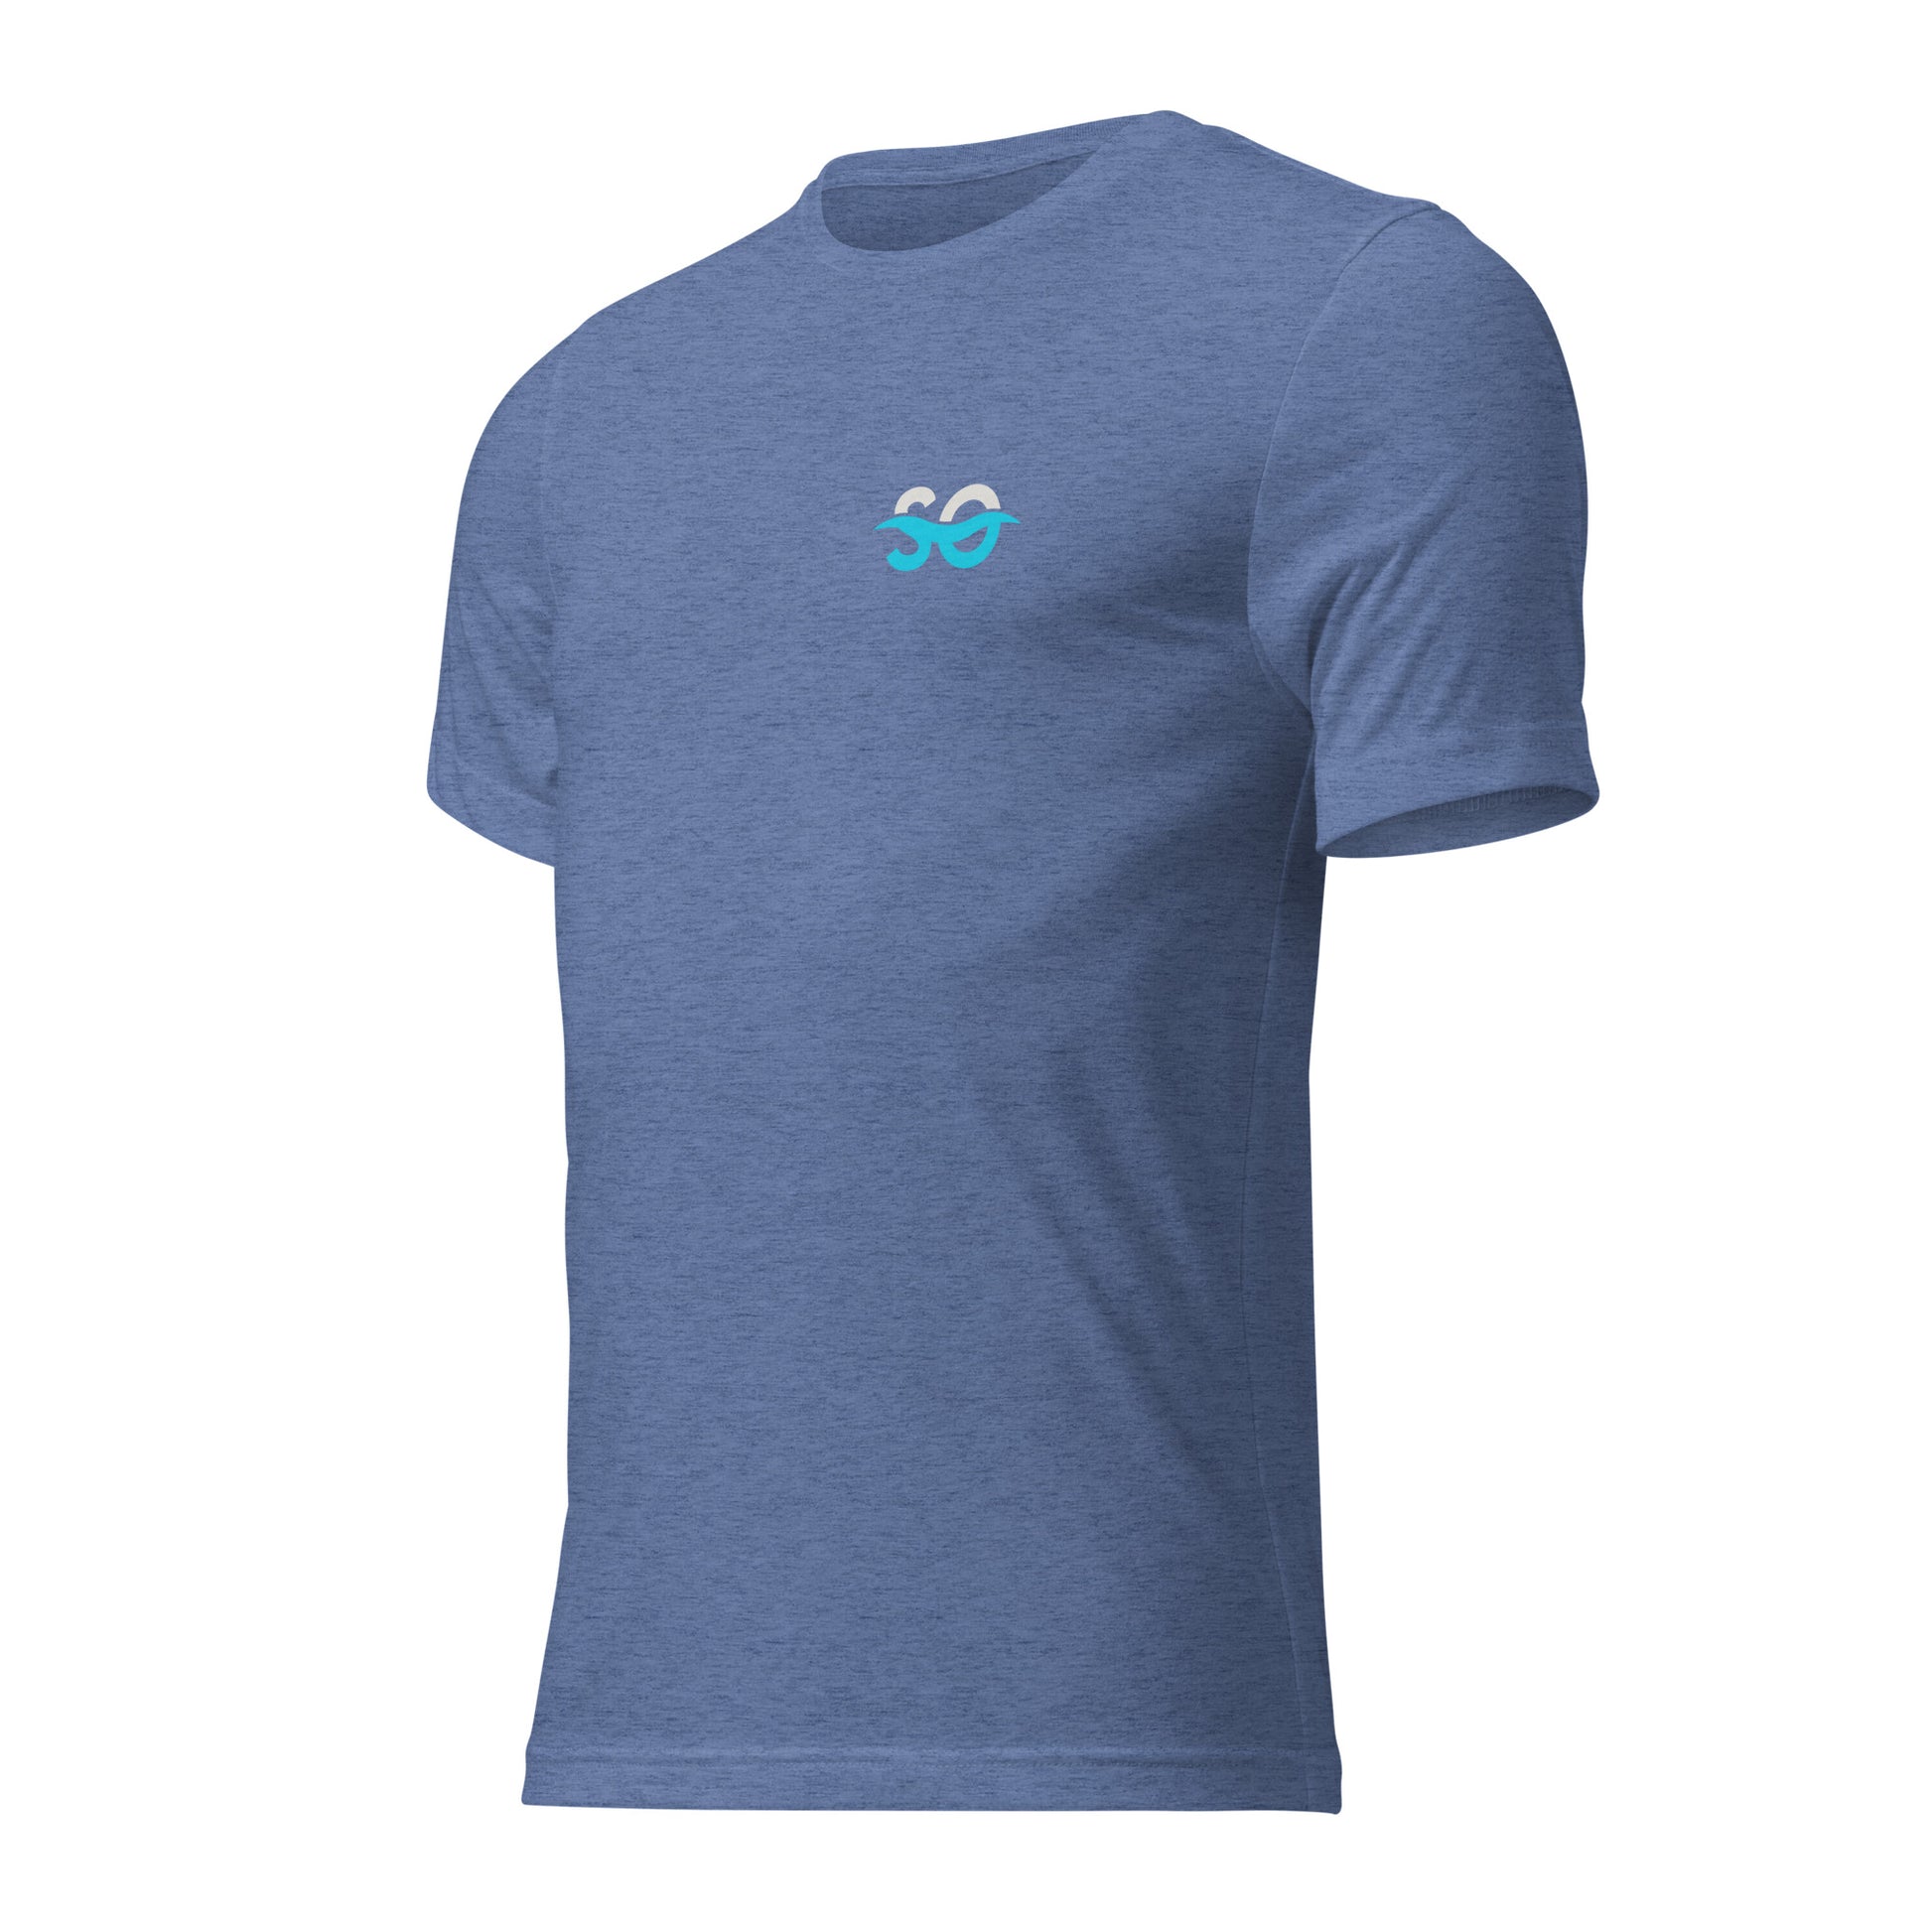 a blue t - shirt with a blue logo on the chest